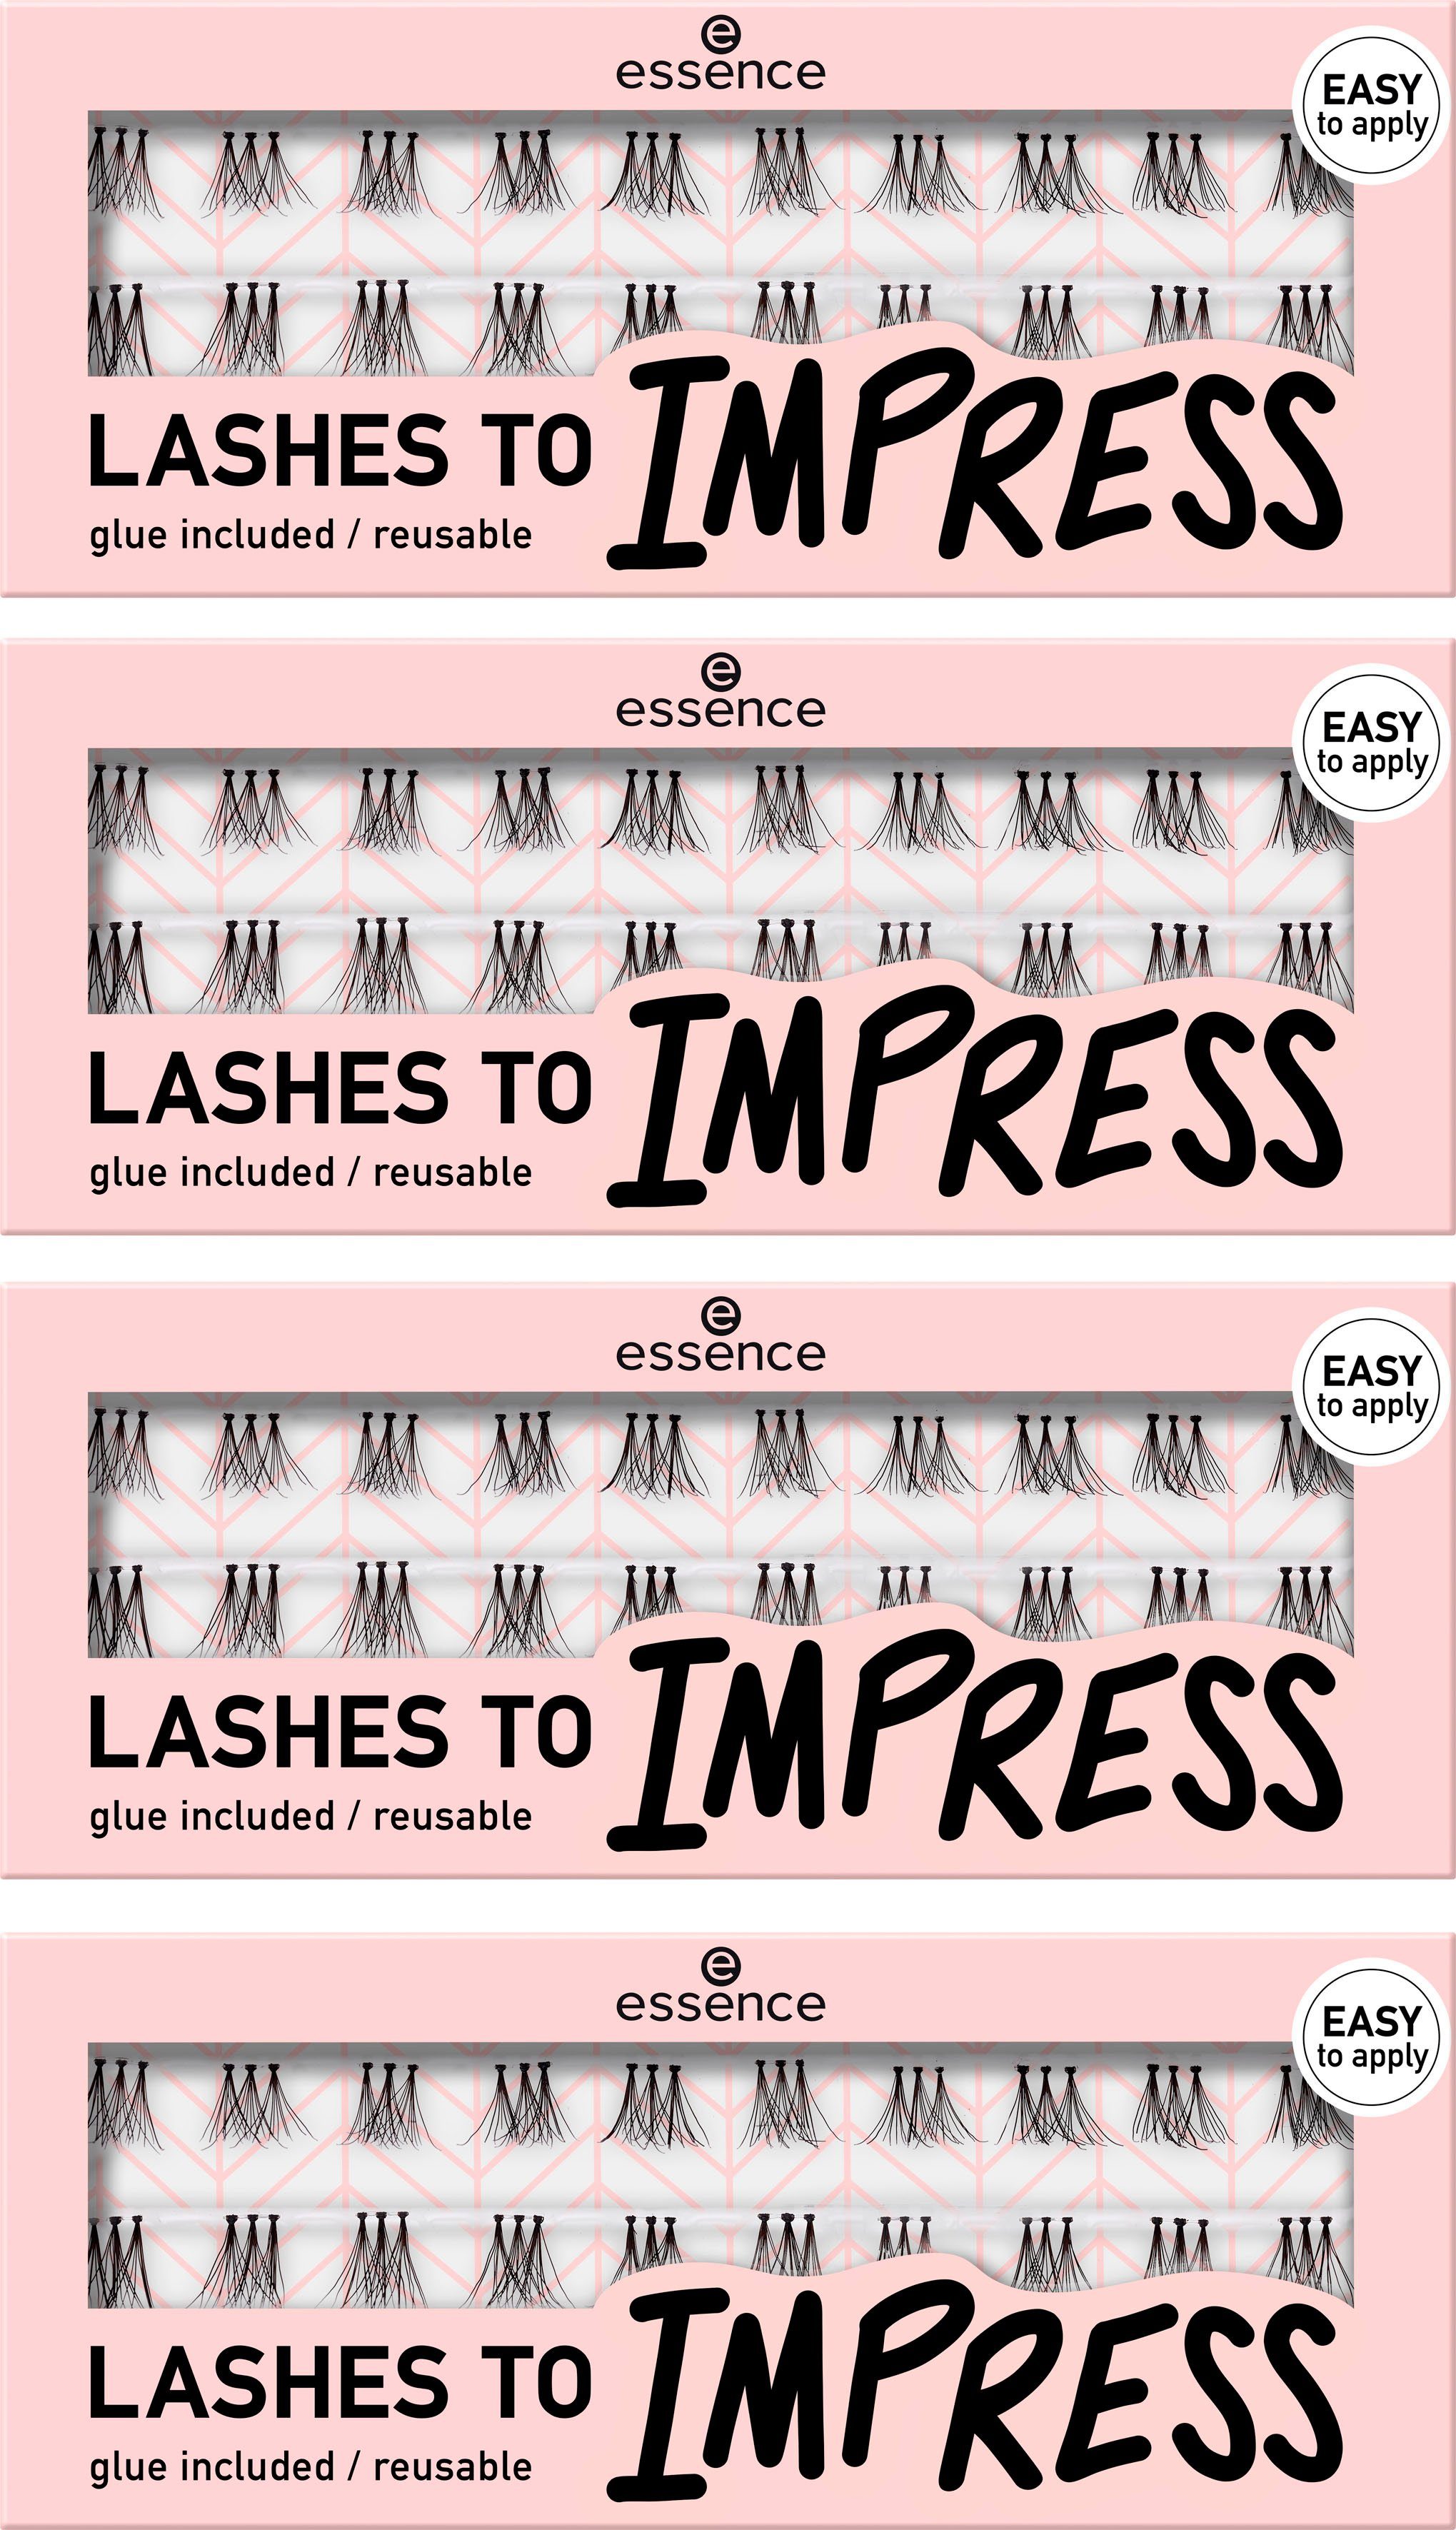 Essence Einzelwimpern »essence LASHES TO IMPRESS 07«, Packung, 4 tlg.